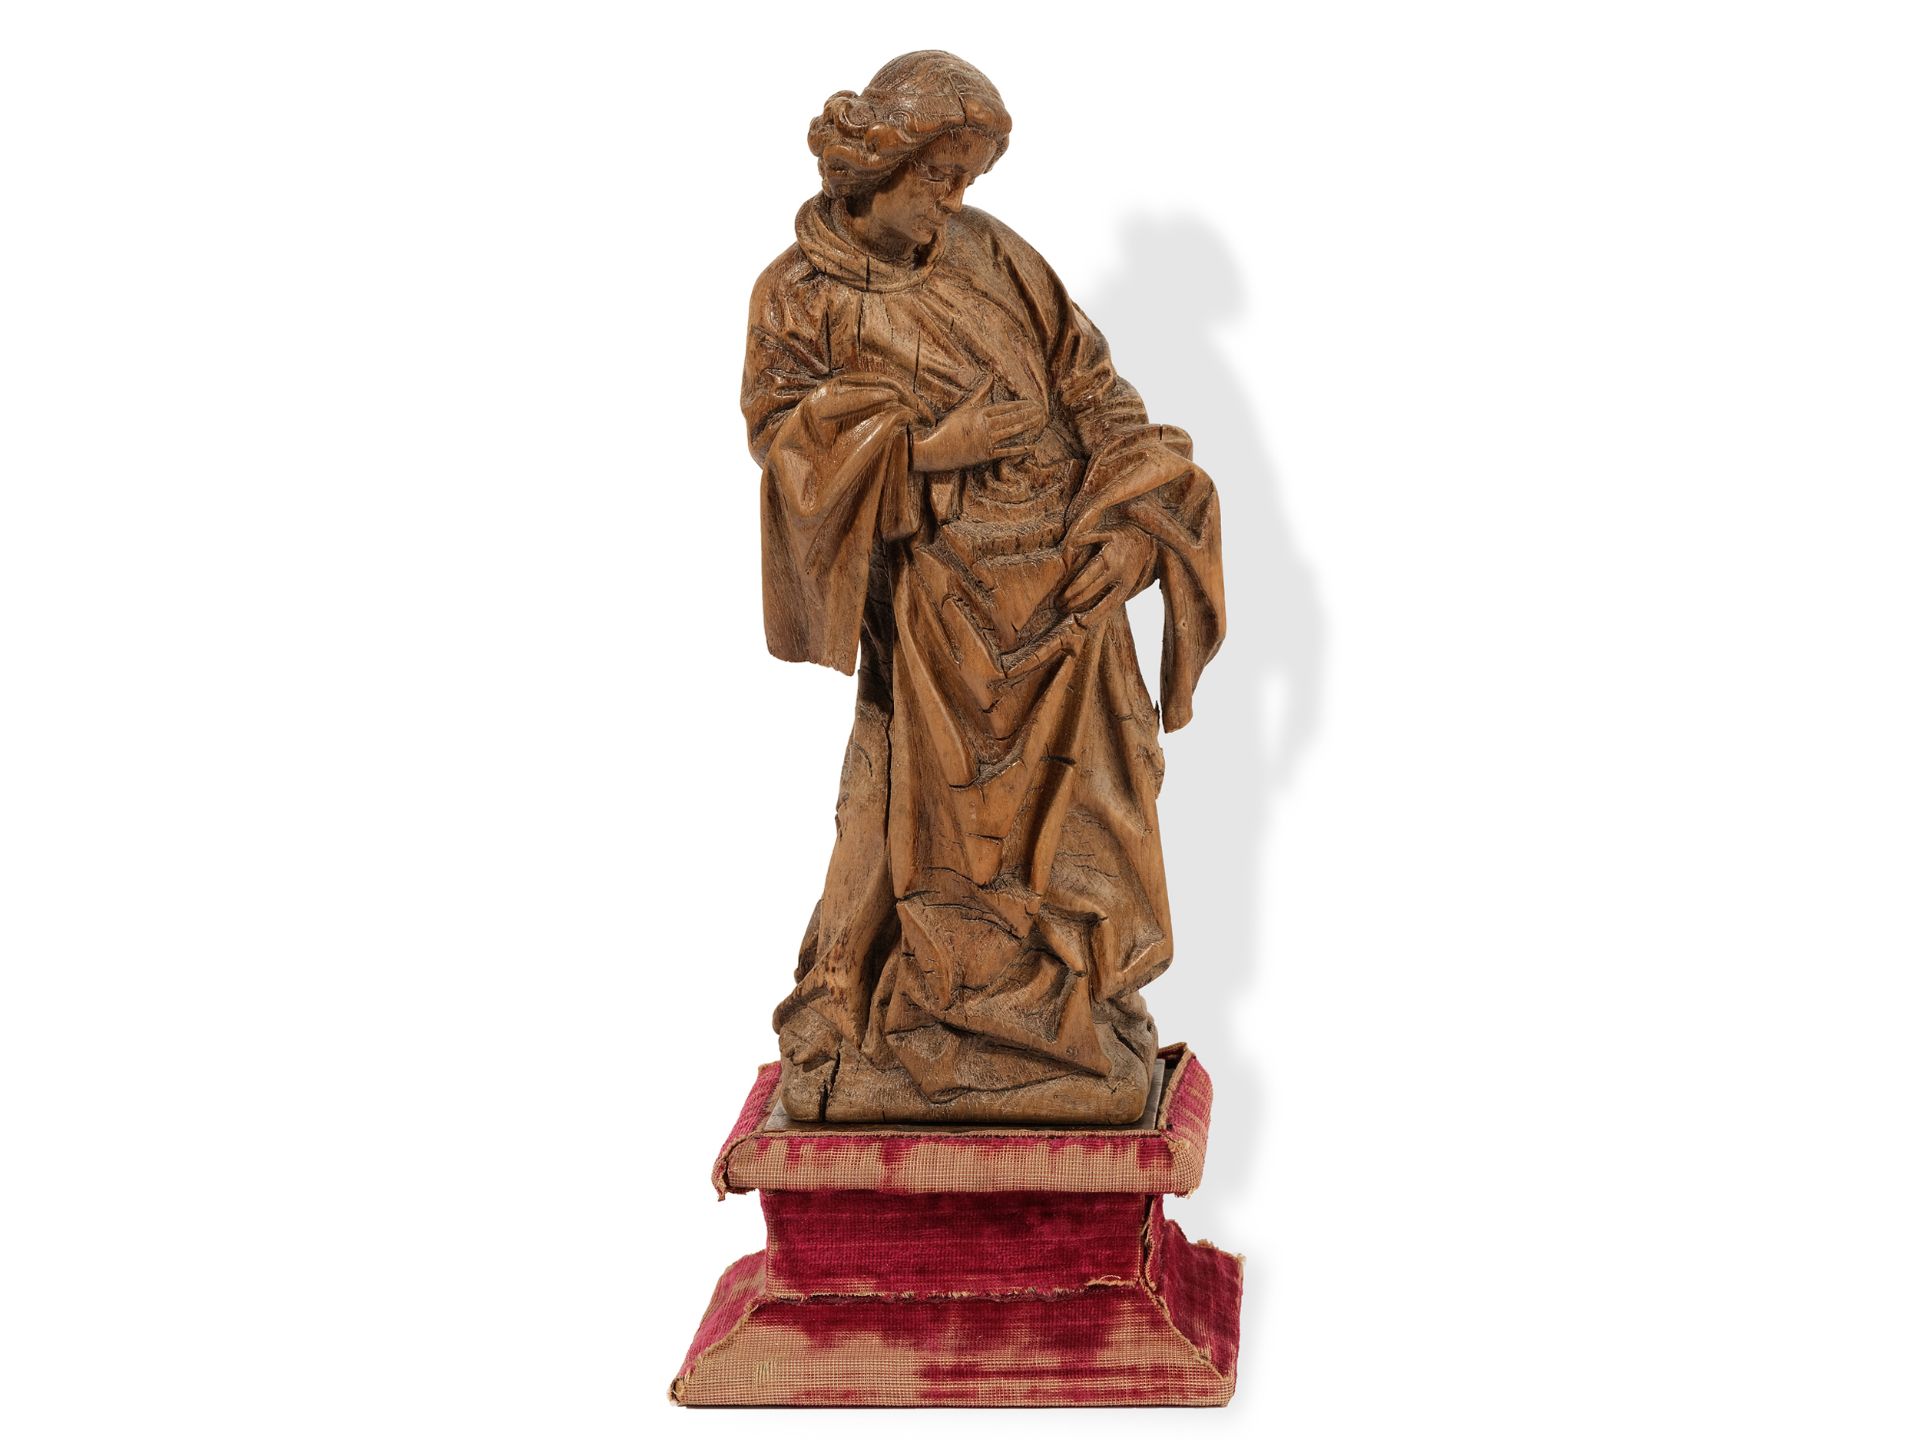 High quality sculpture, 
Brabant, Brussels?, 
Ca. 1500